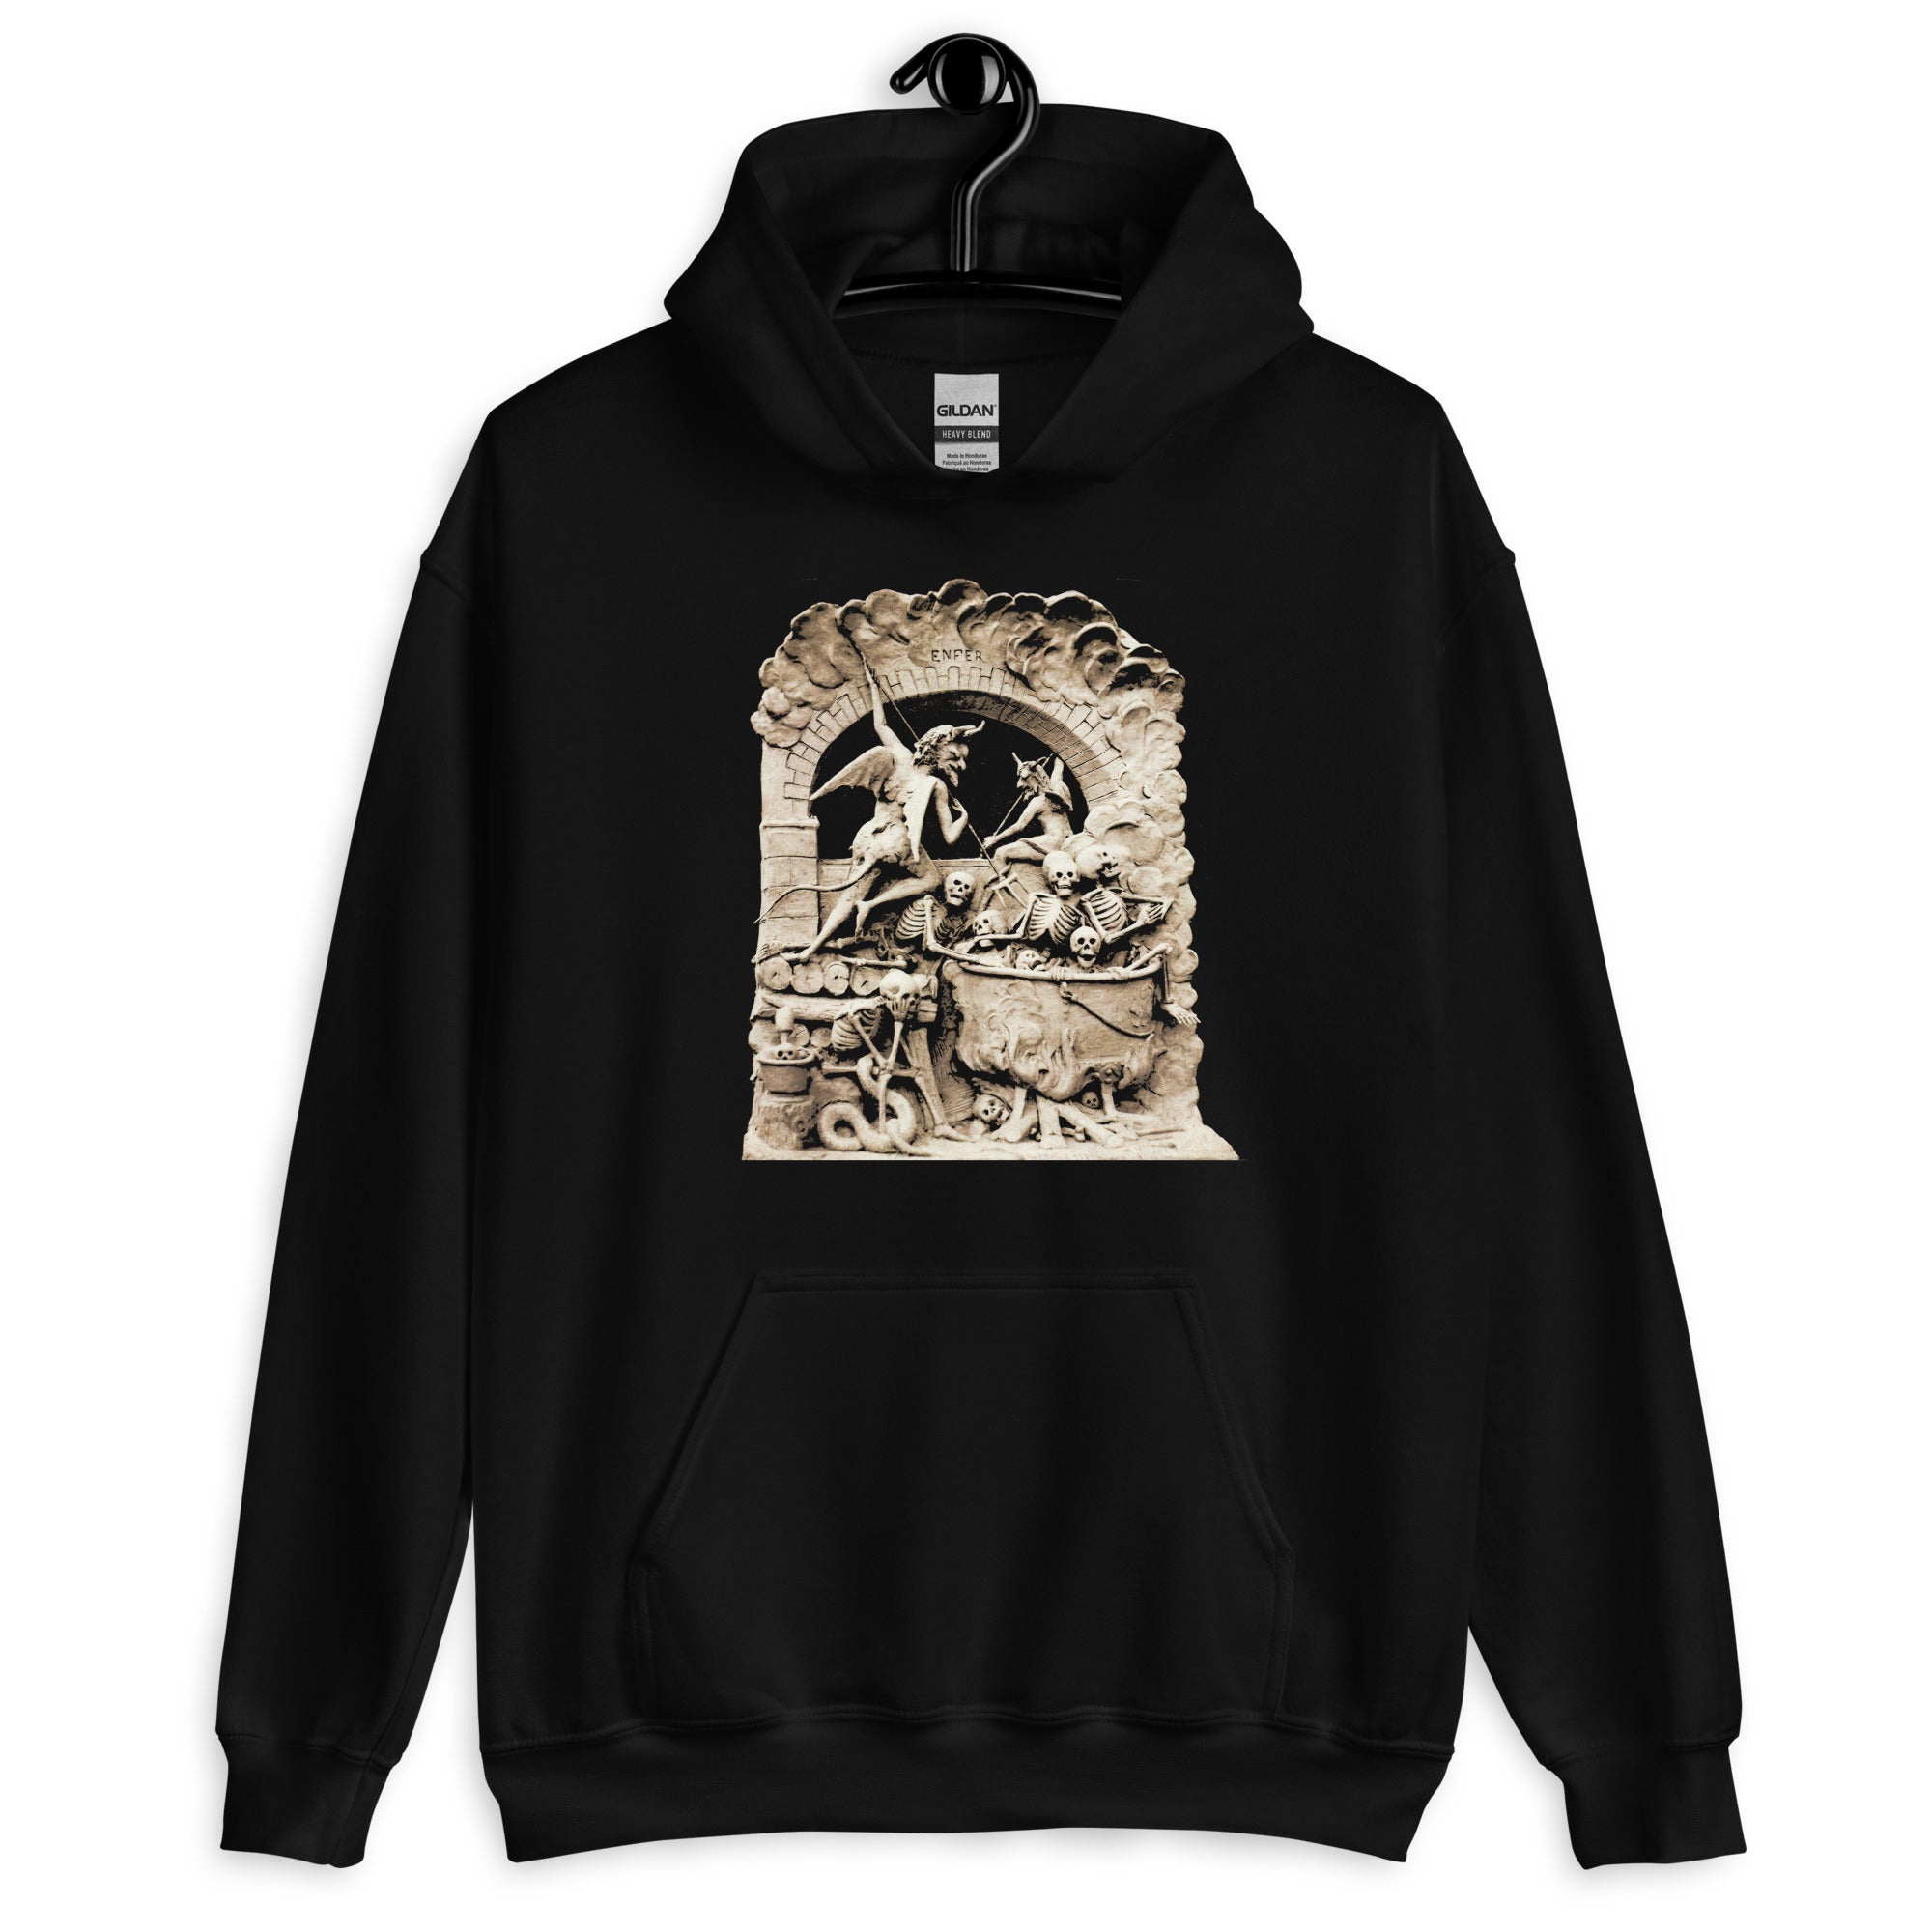 Les Diableries The Pits of Hell and the Devil Unisex Hoodie Sweatshirt - Edge of Life Designs